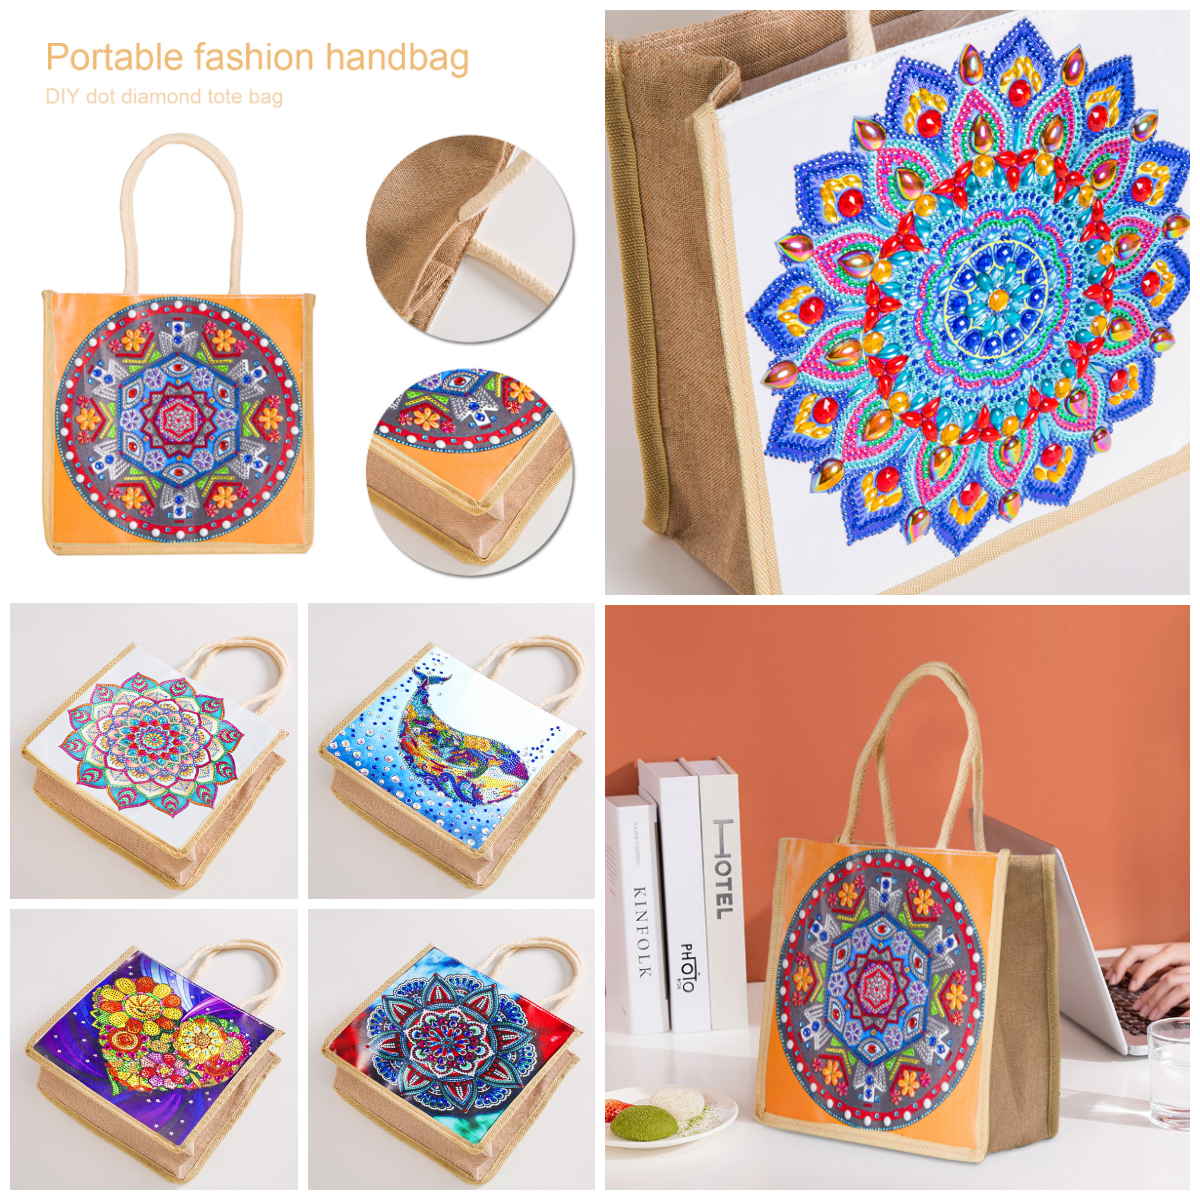 5D DIY Diamond Painting Linen Bags Handbag Mosaic Art Reusable Eco-friendly  Storage Pouch for Shopping Foldable Grocery Tote